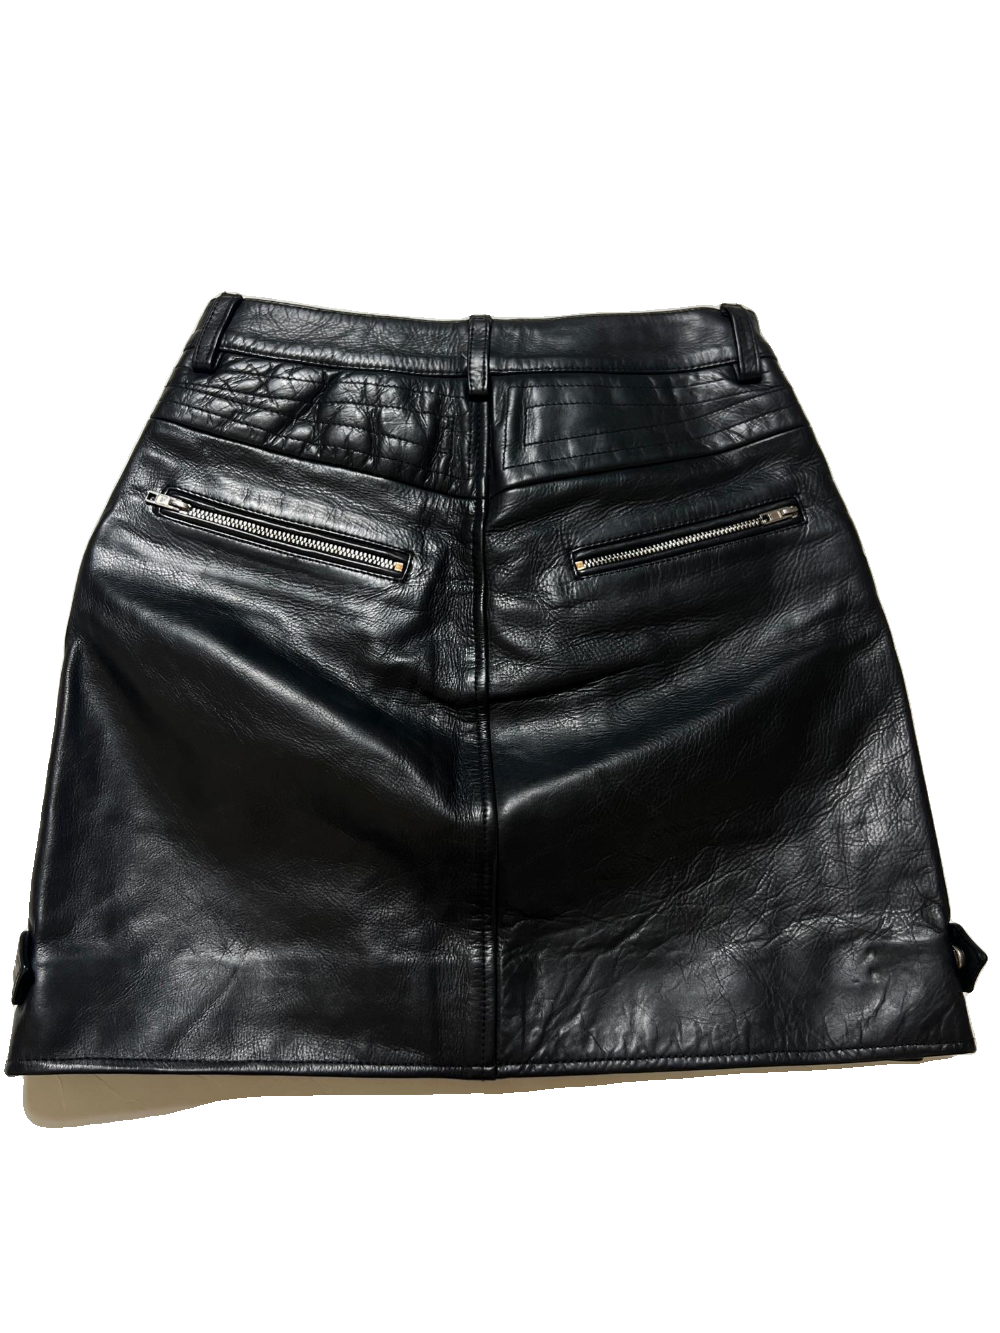 7 for all Mankind- Black Leather Skirt